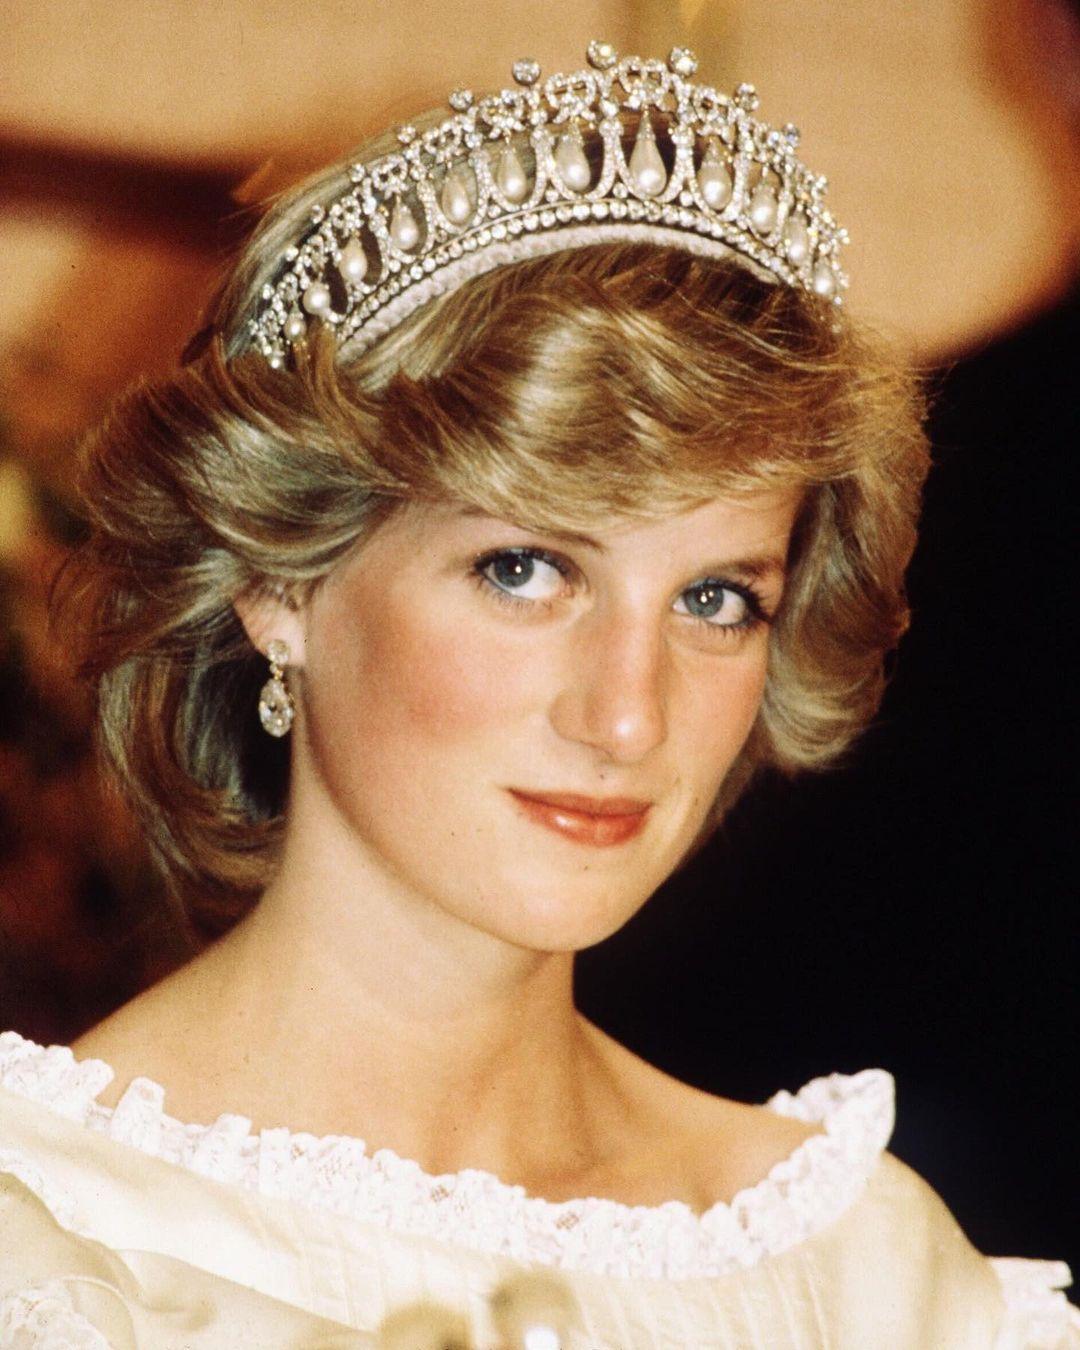 
 Ahead of the Queen's Platinum #Jubilee, we're taking a look back at some of the royal family's most impressive jewels. When it comes to royal jewellery, it all stays in the family. For centuries, the British royals have passed priceless pieces from one generation to the next — although they don’t always survive intact. “Pieces are often modified to better suit current tastes or to be more wearable for an individual woman,” notes Ella Kay, the expert behind The Court Jeweller. As fashions change, royals are keen to recycle or redesign precious pieces, “simply so they're able to be worn and not just gathering dust”.

Whether that means shortening necklaces, as Queen Elizabeth II has done to ensure a better fit, or entirely dissembling stomachers — an accessory often unwearable with modern clothing — most of the royal jewels have been through something of a journey.

At the link in our bio, we’ve rounded up 12 royal heirlooms, tracing how they’ve been styled by multiple generations — from the Lover’s Knot Tiara, currently tied to the Duchess of Cambridge, to Princess Diana’s engagement ring. 
 